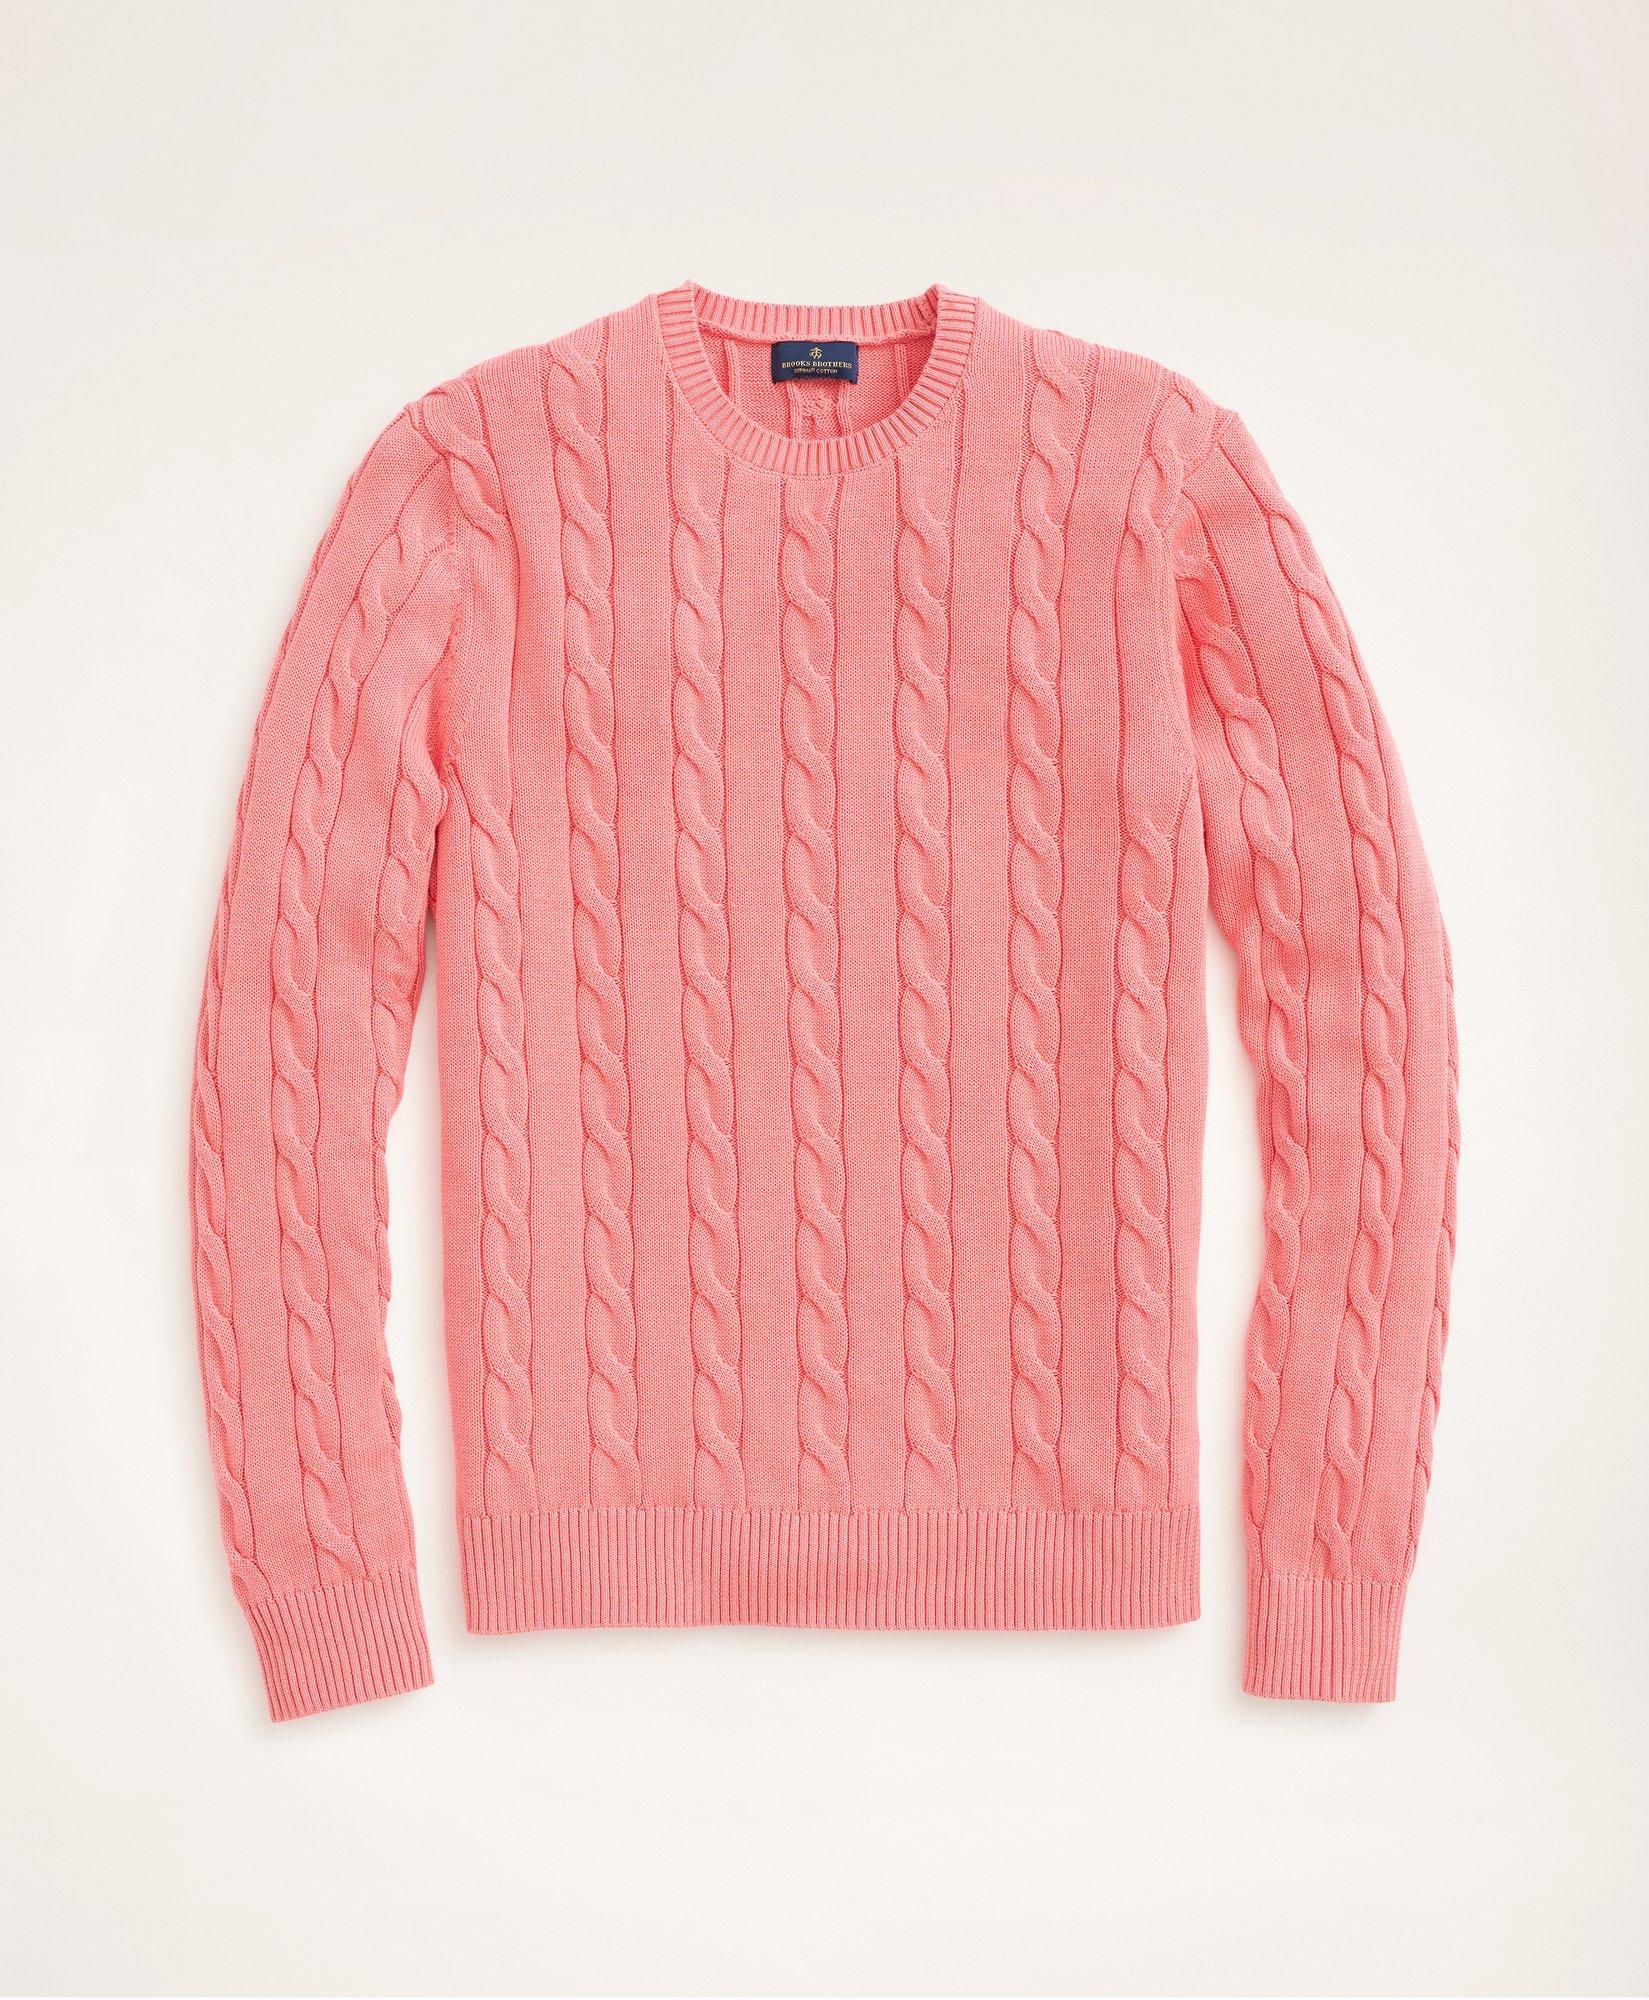 Brooks Brothers Big & Tall Supima Cotton Cable Crewneck Sweater | Pink | Size 2x Tall